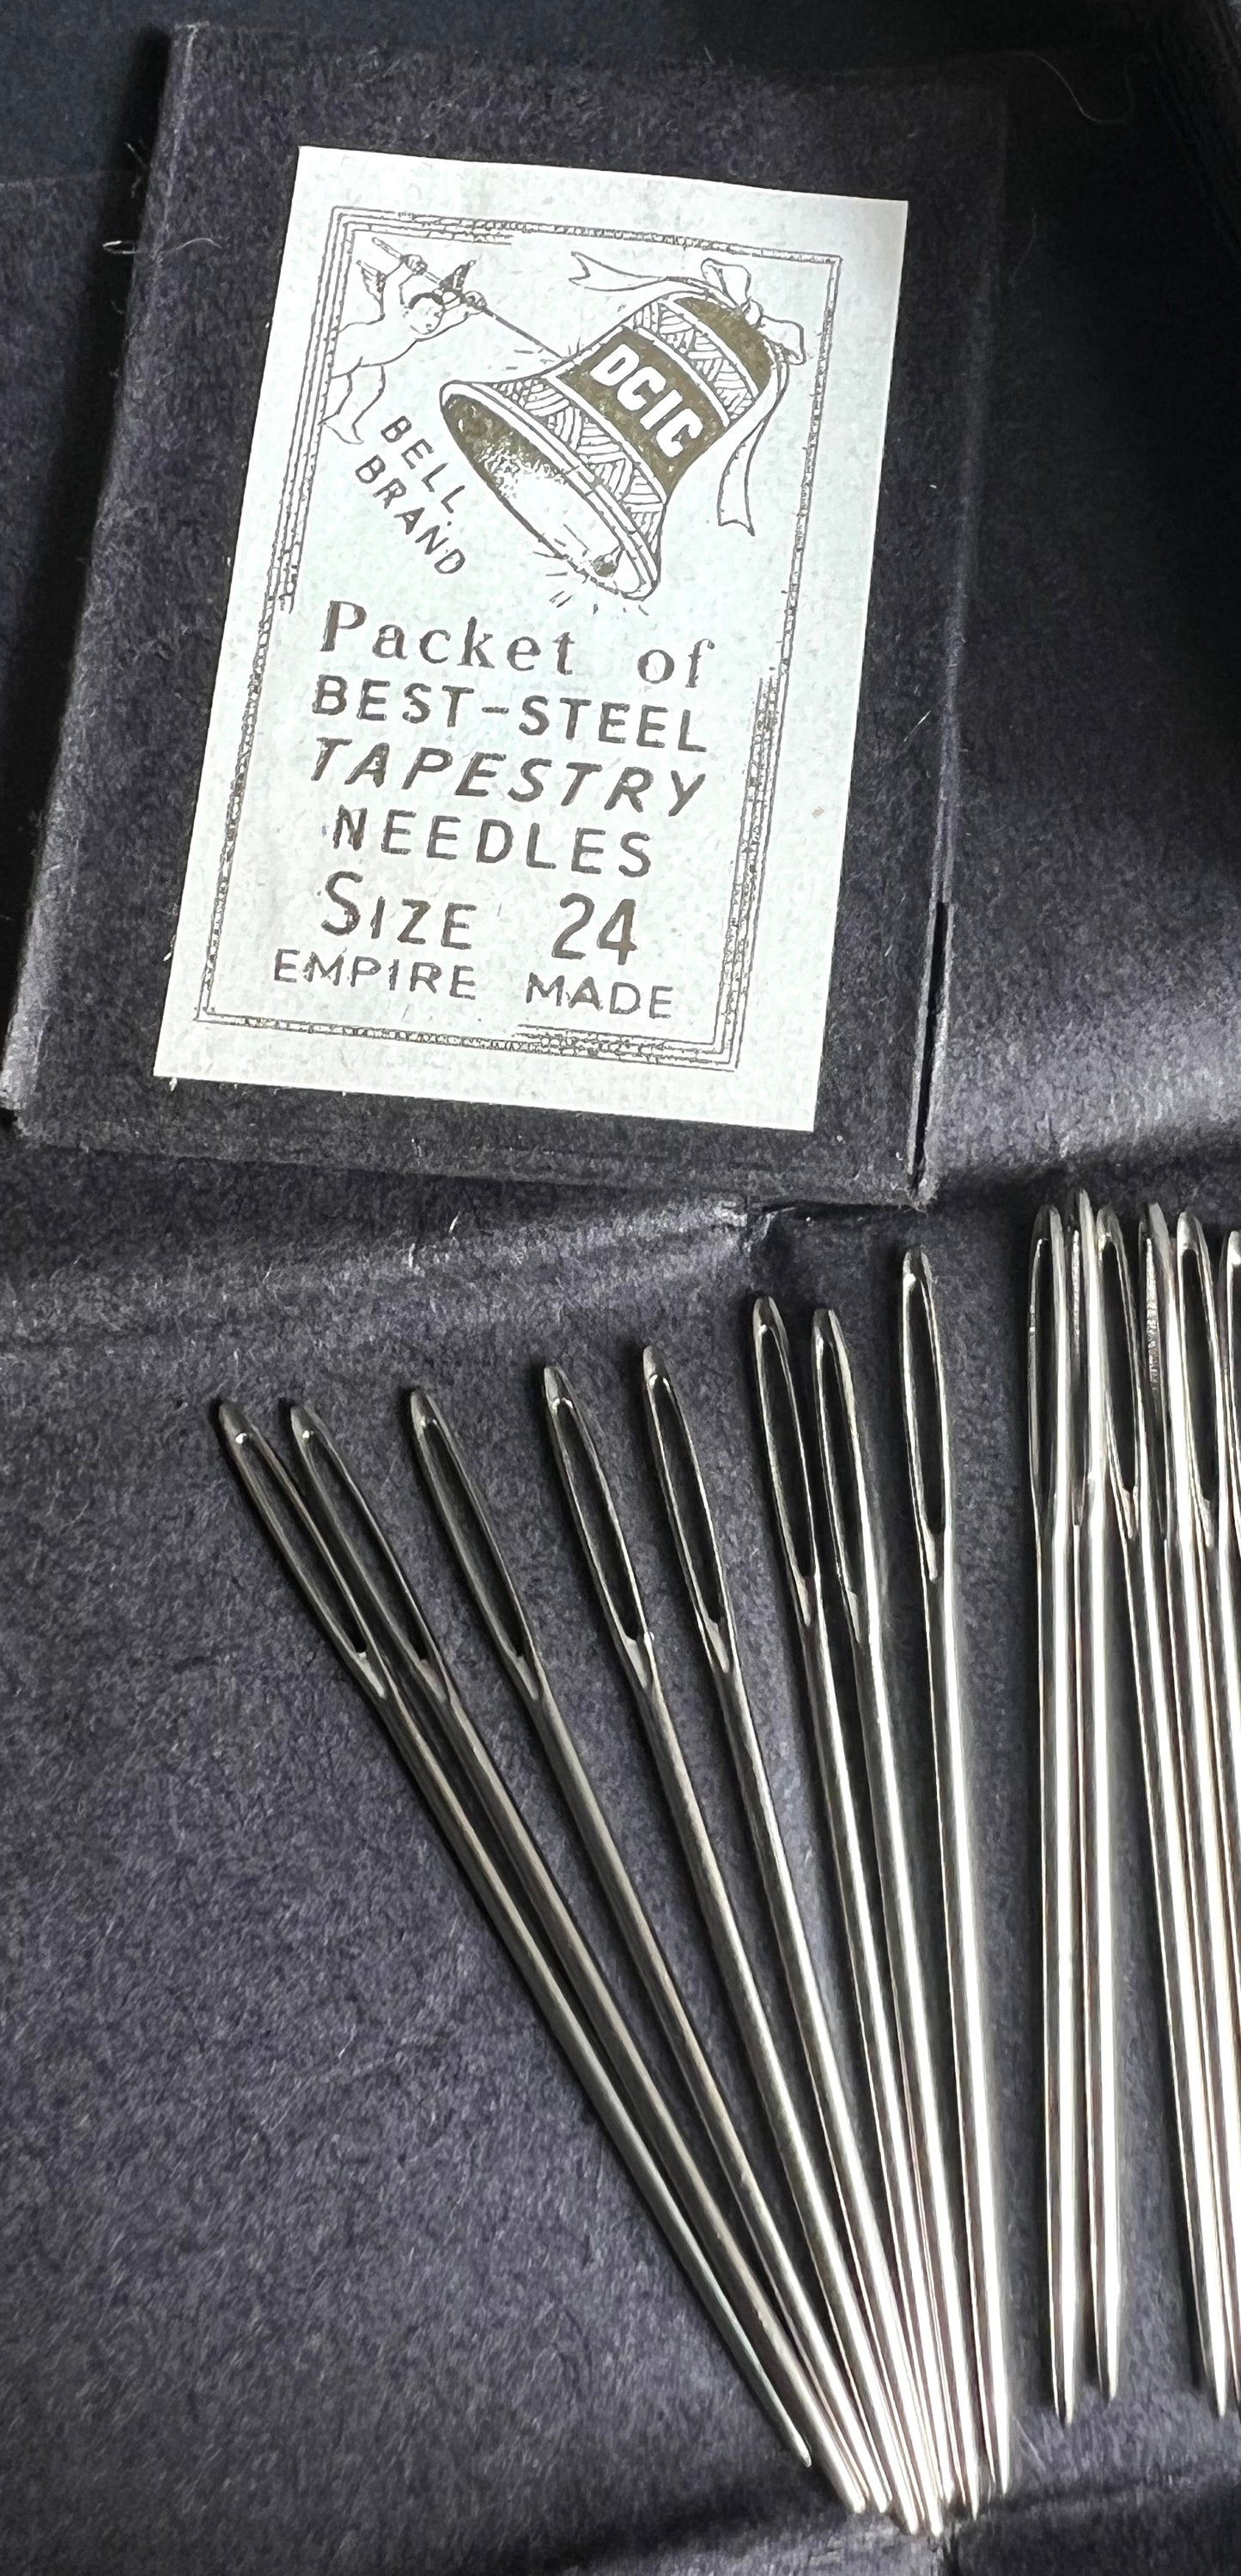 25 Best Steel 4cm Empire Made Size 24 Tapestry Needles